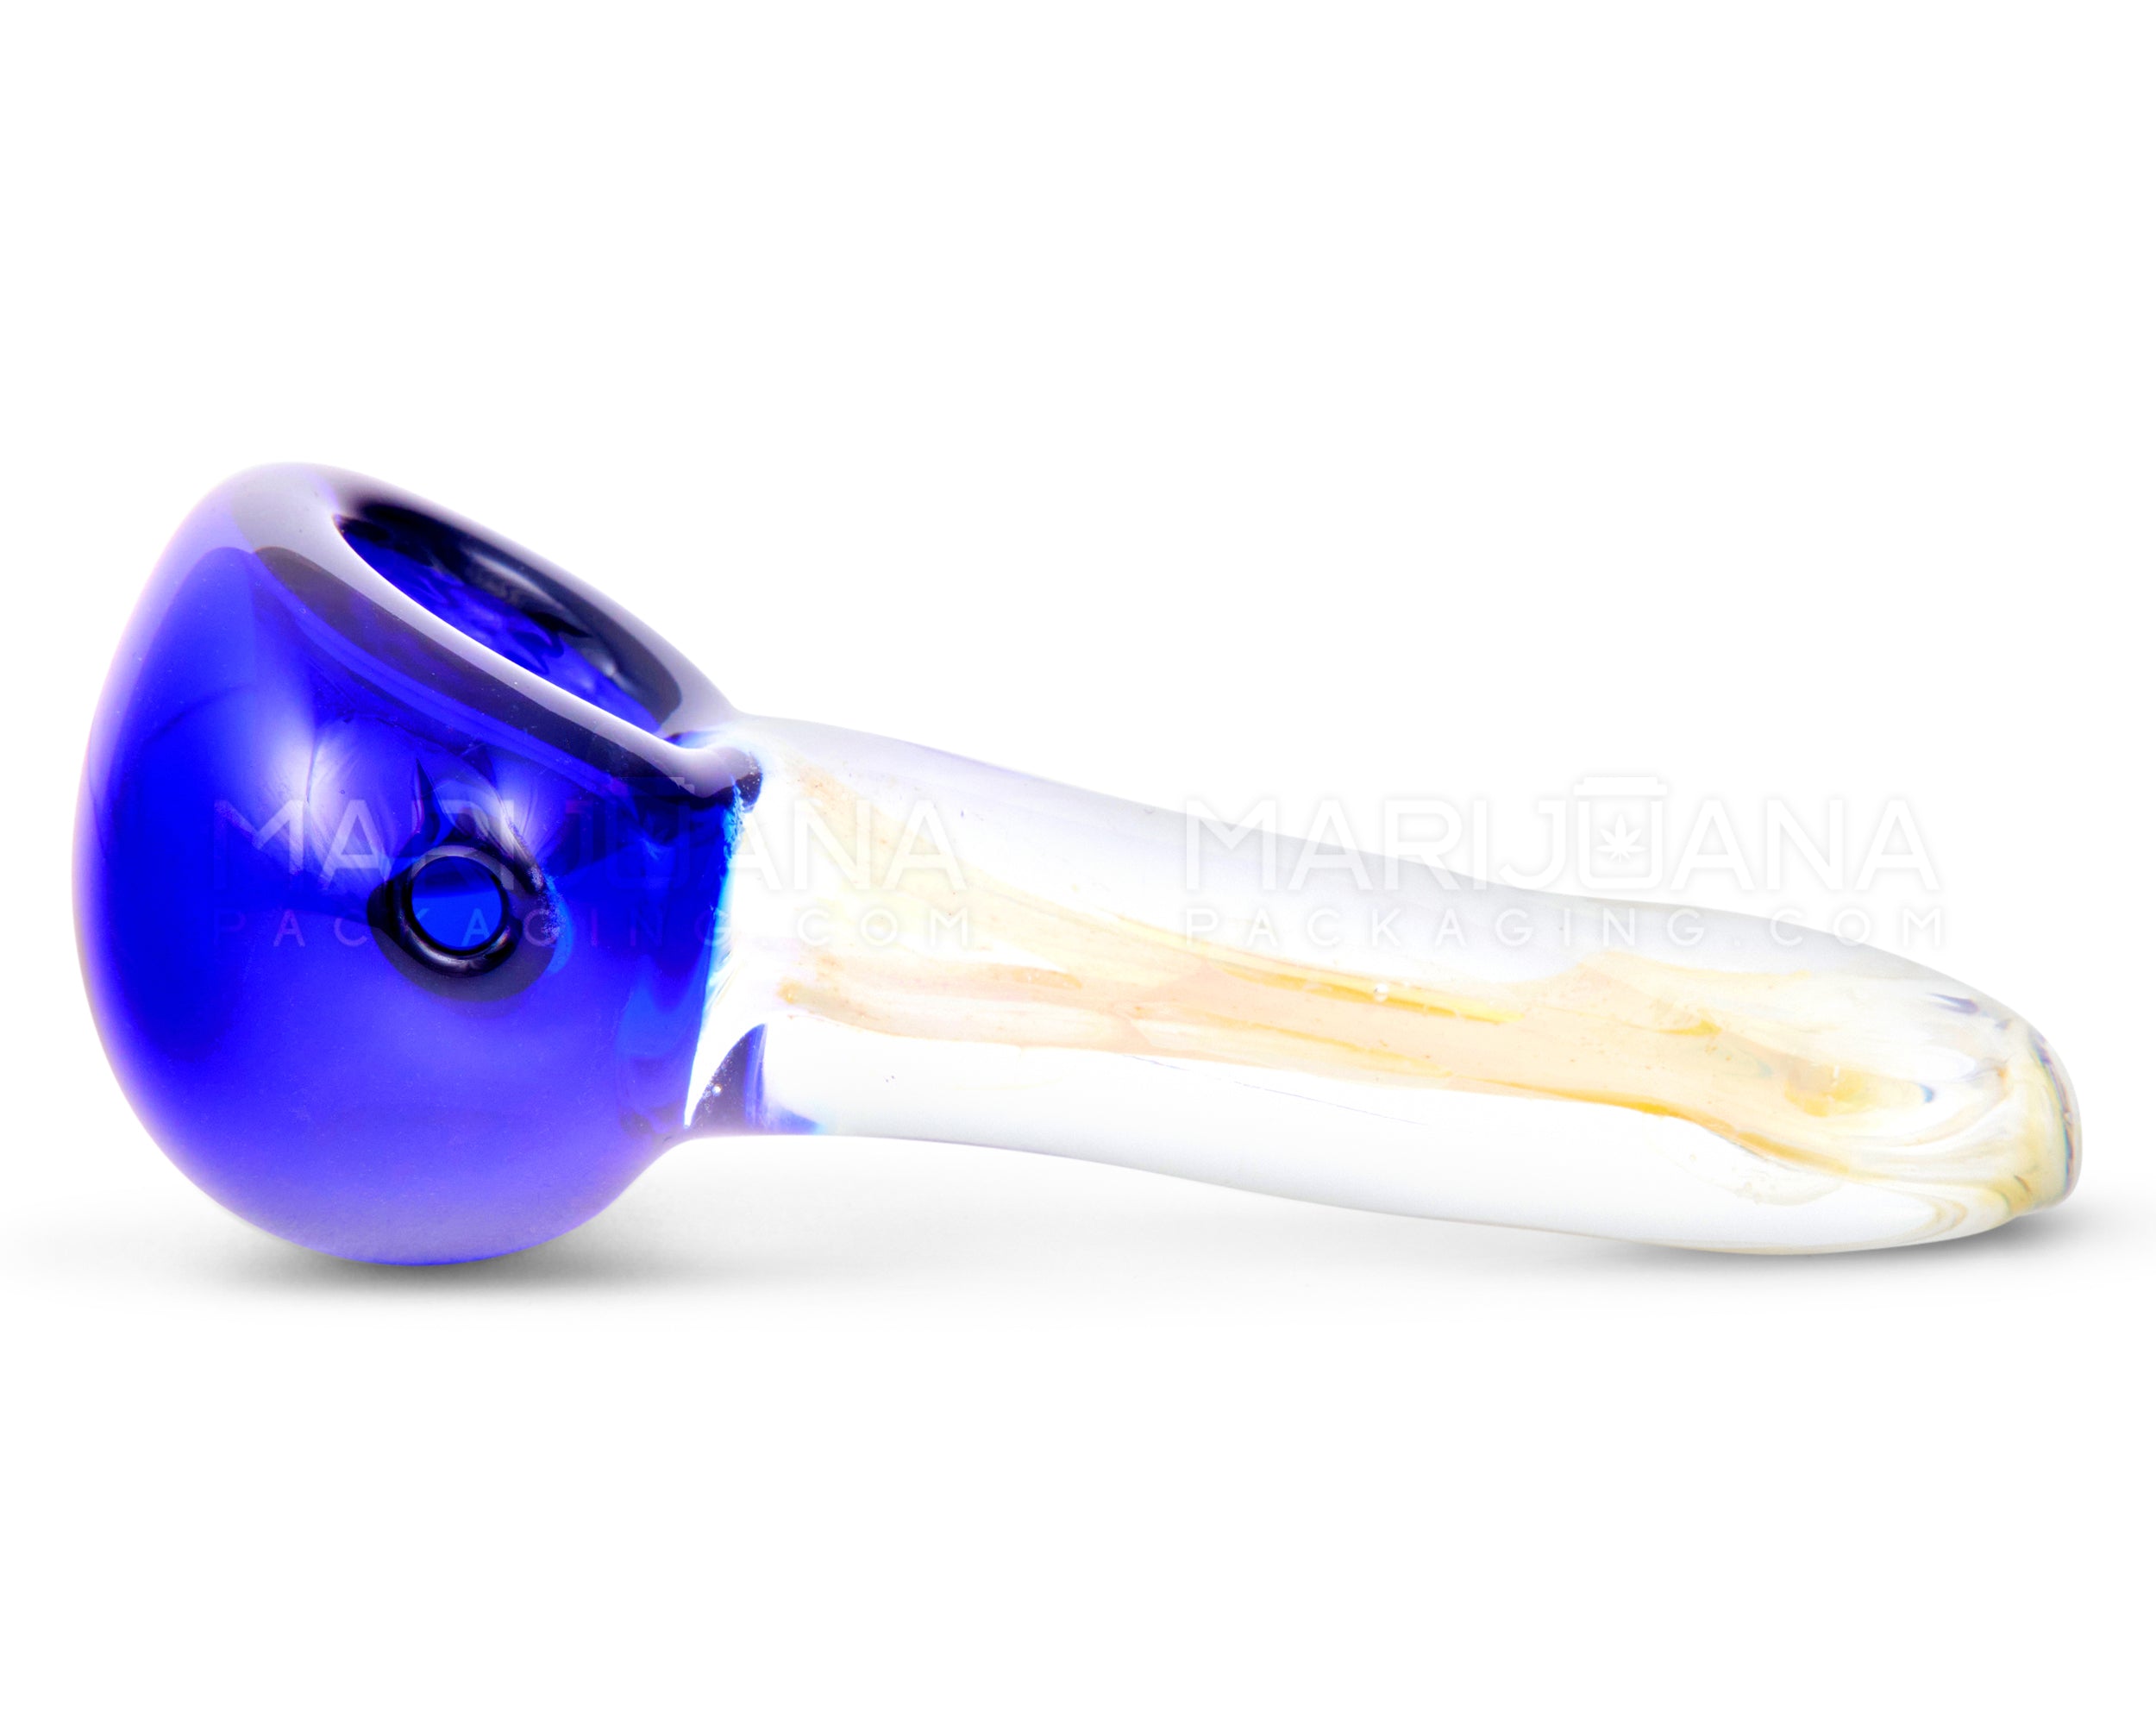 Flat Mouthpiece Fumed Spoon Hand Pipe | 3.5in Long - Glass - Assorted - 4